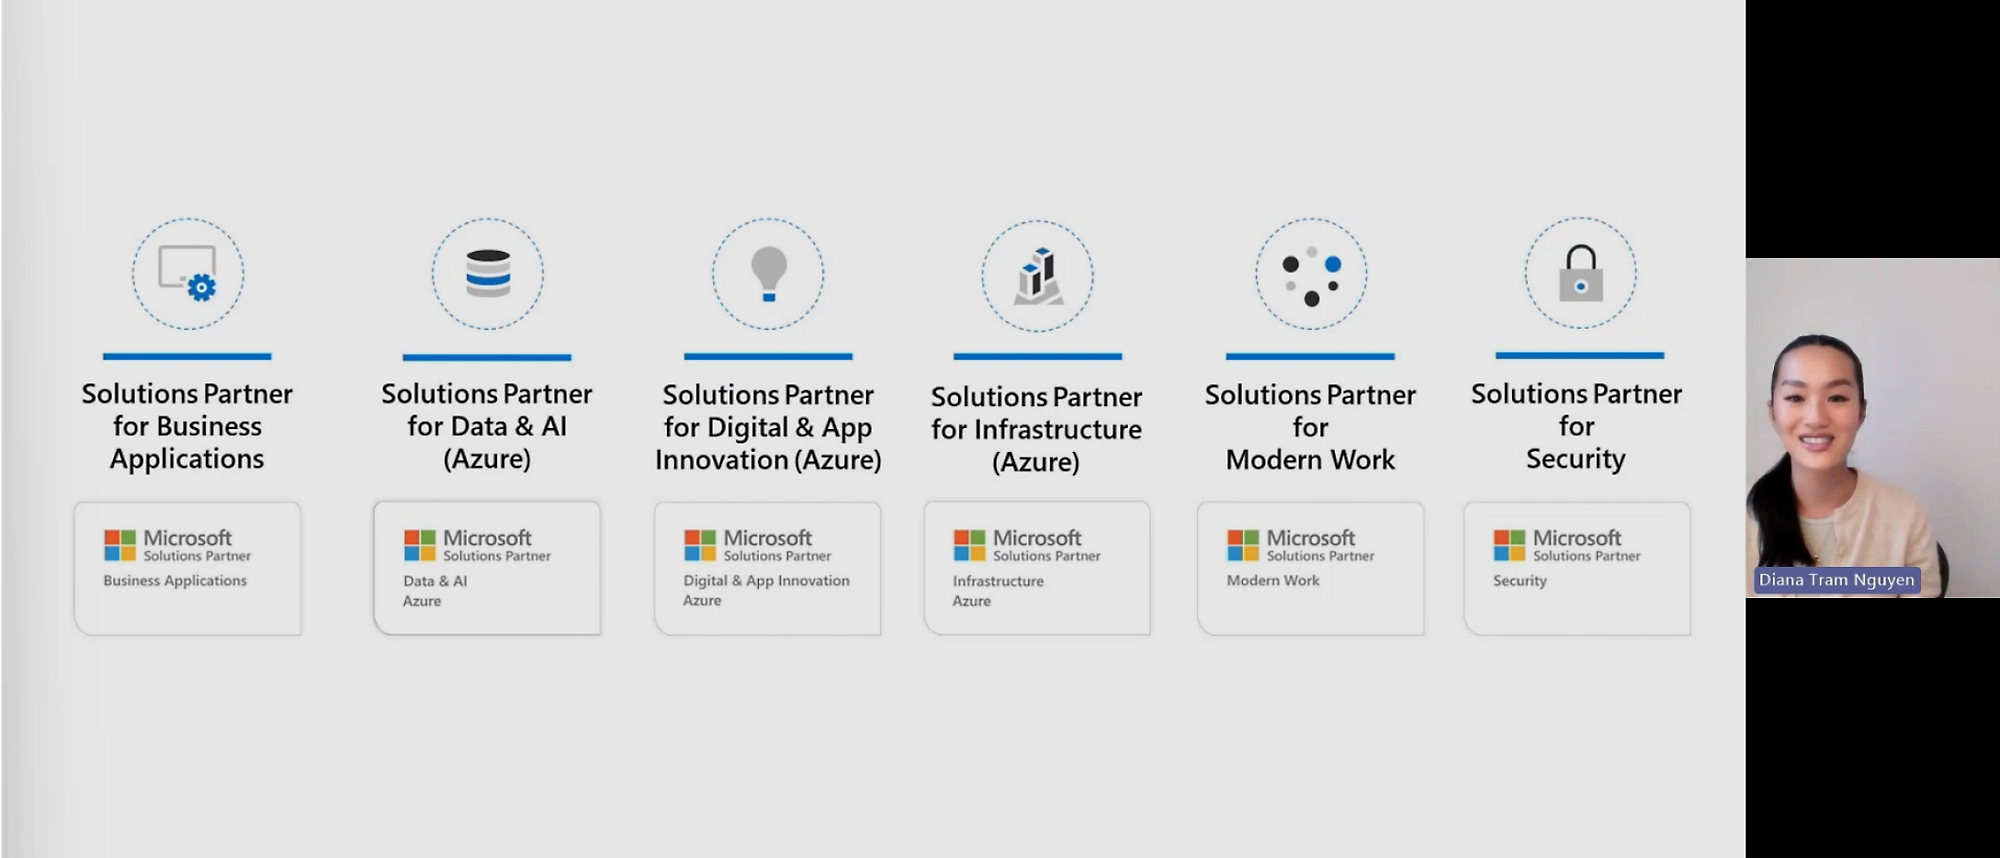 A screen shot of a video showing a page on microsoft.com related to solution partners